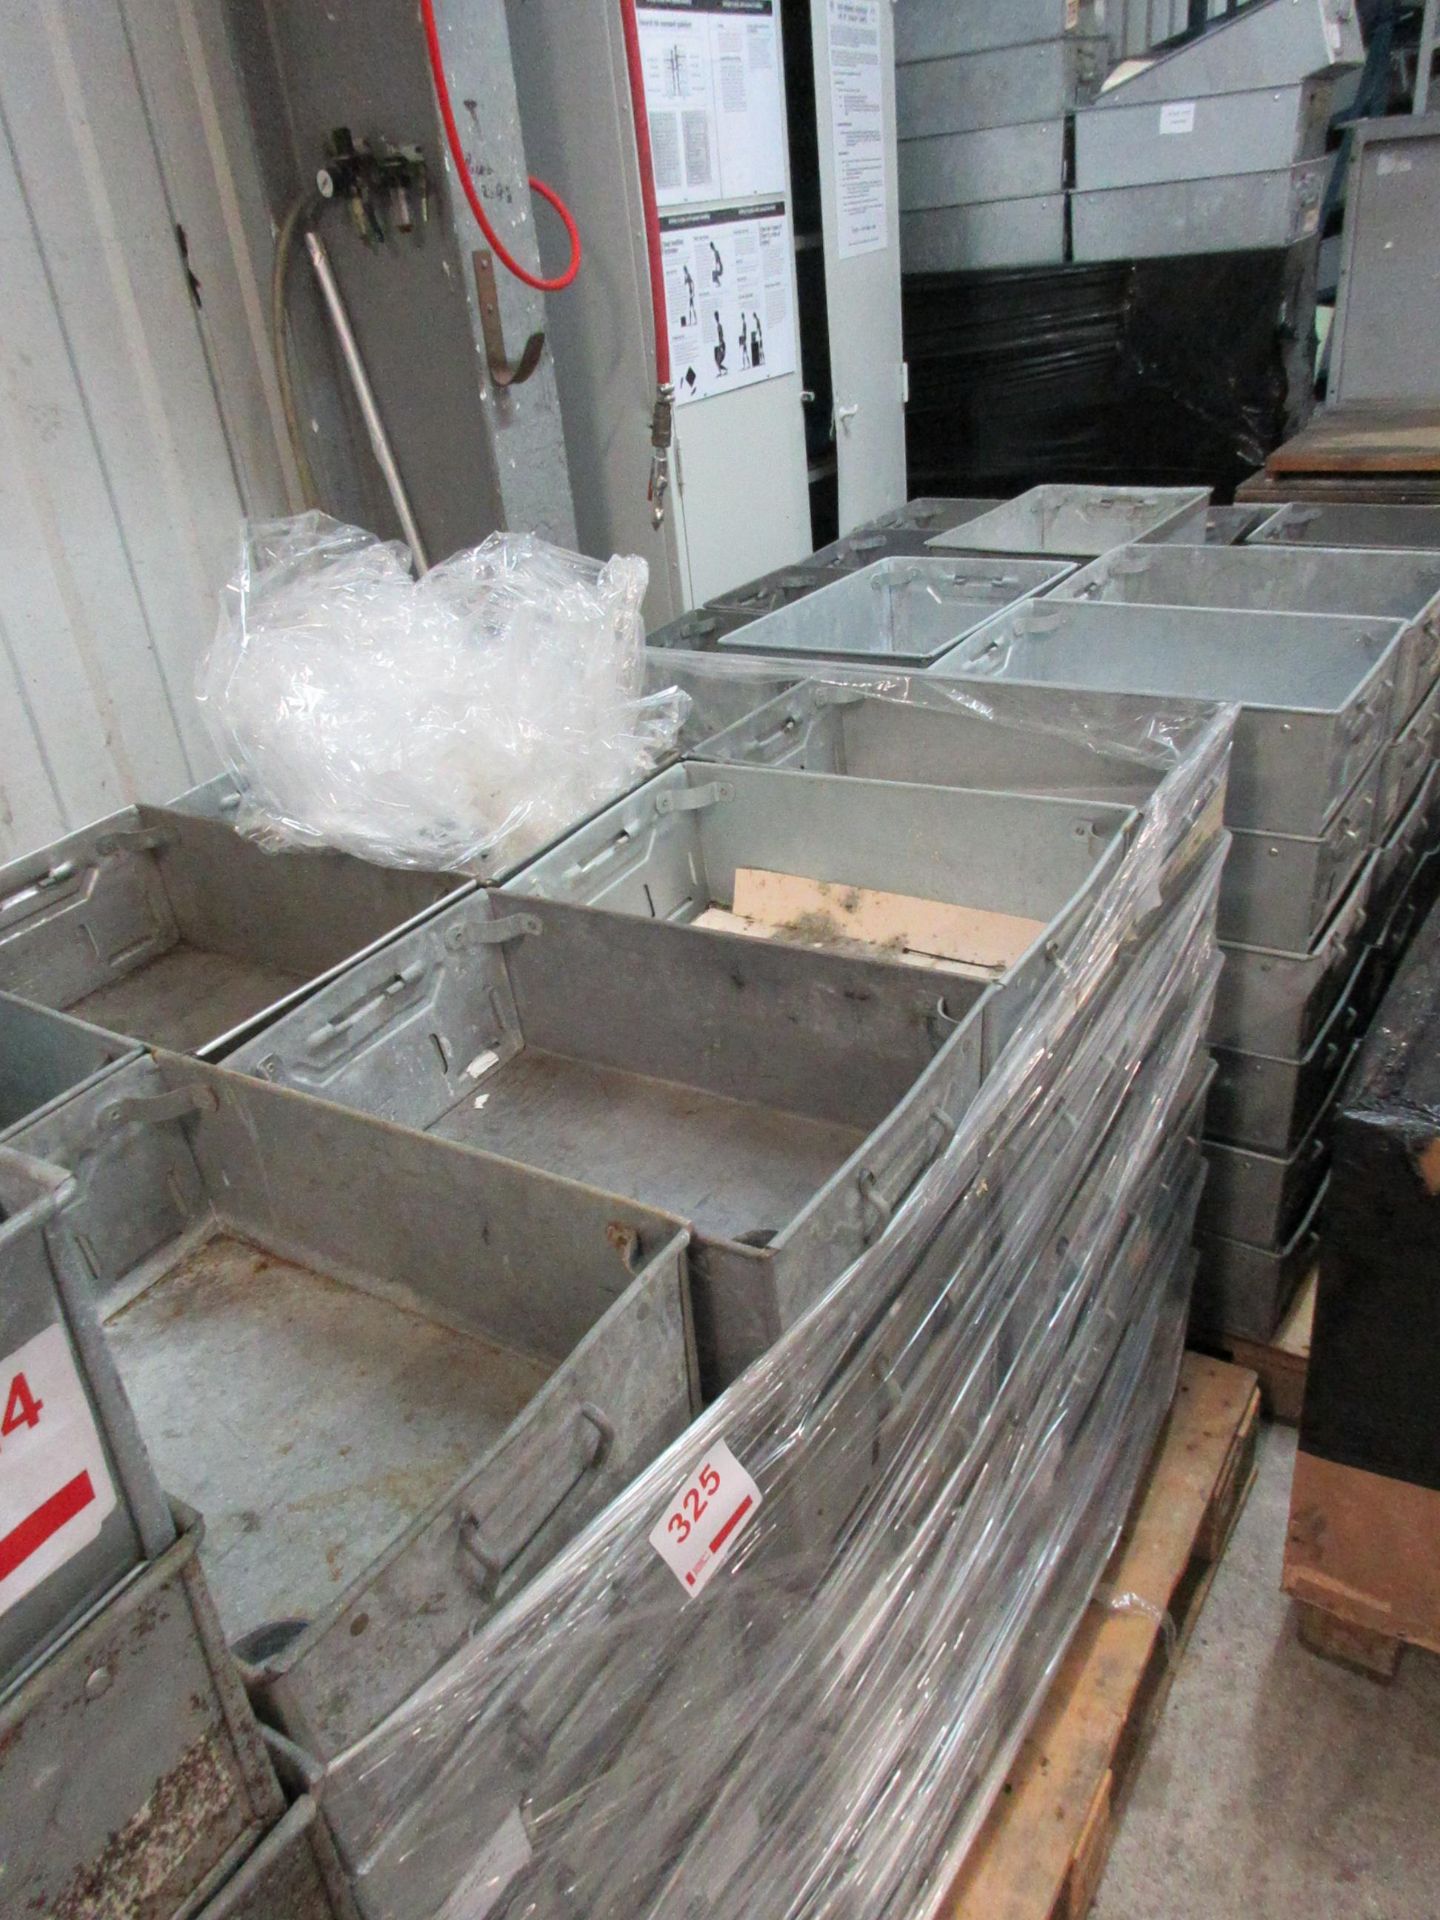 Quantity of tote pans